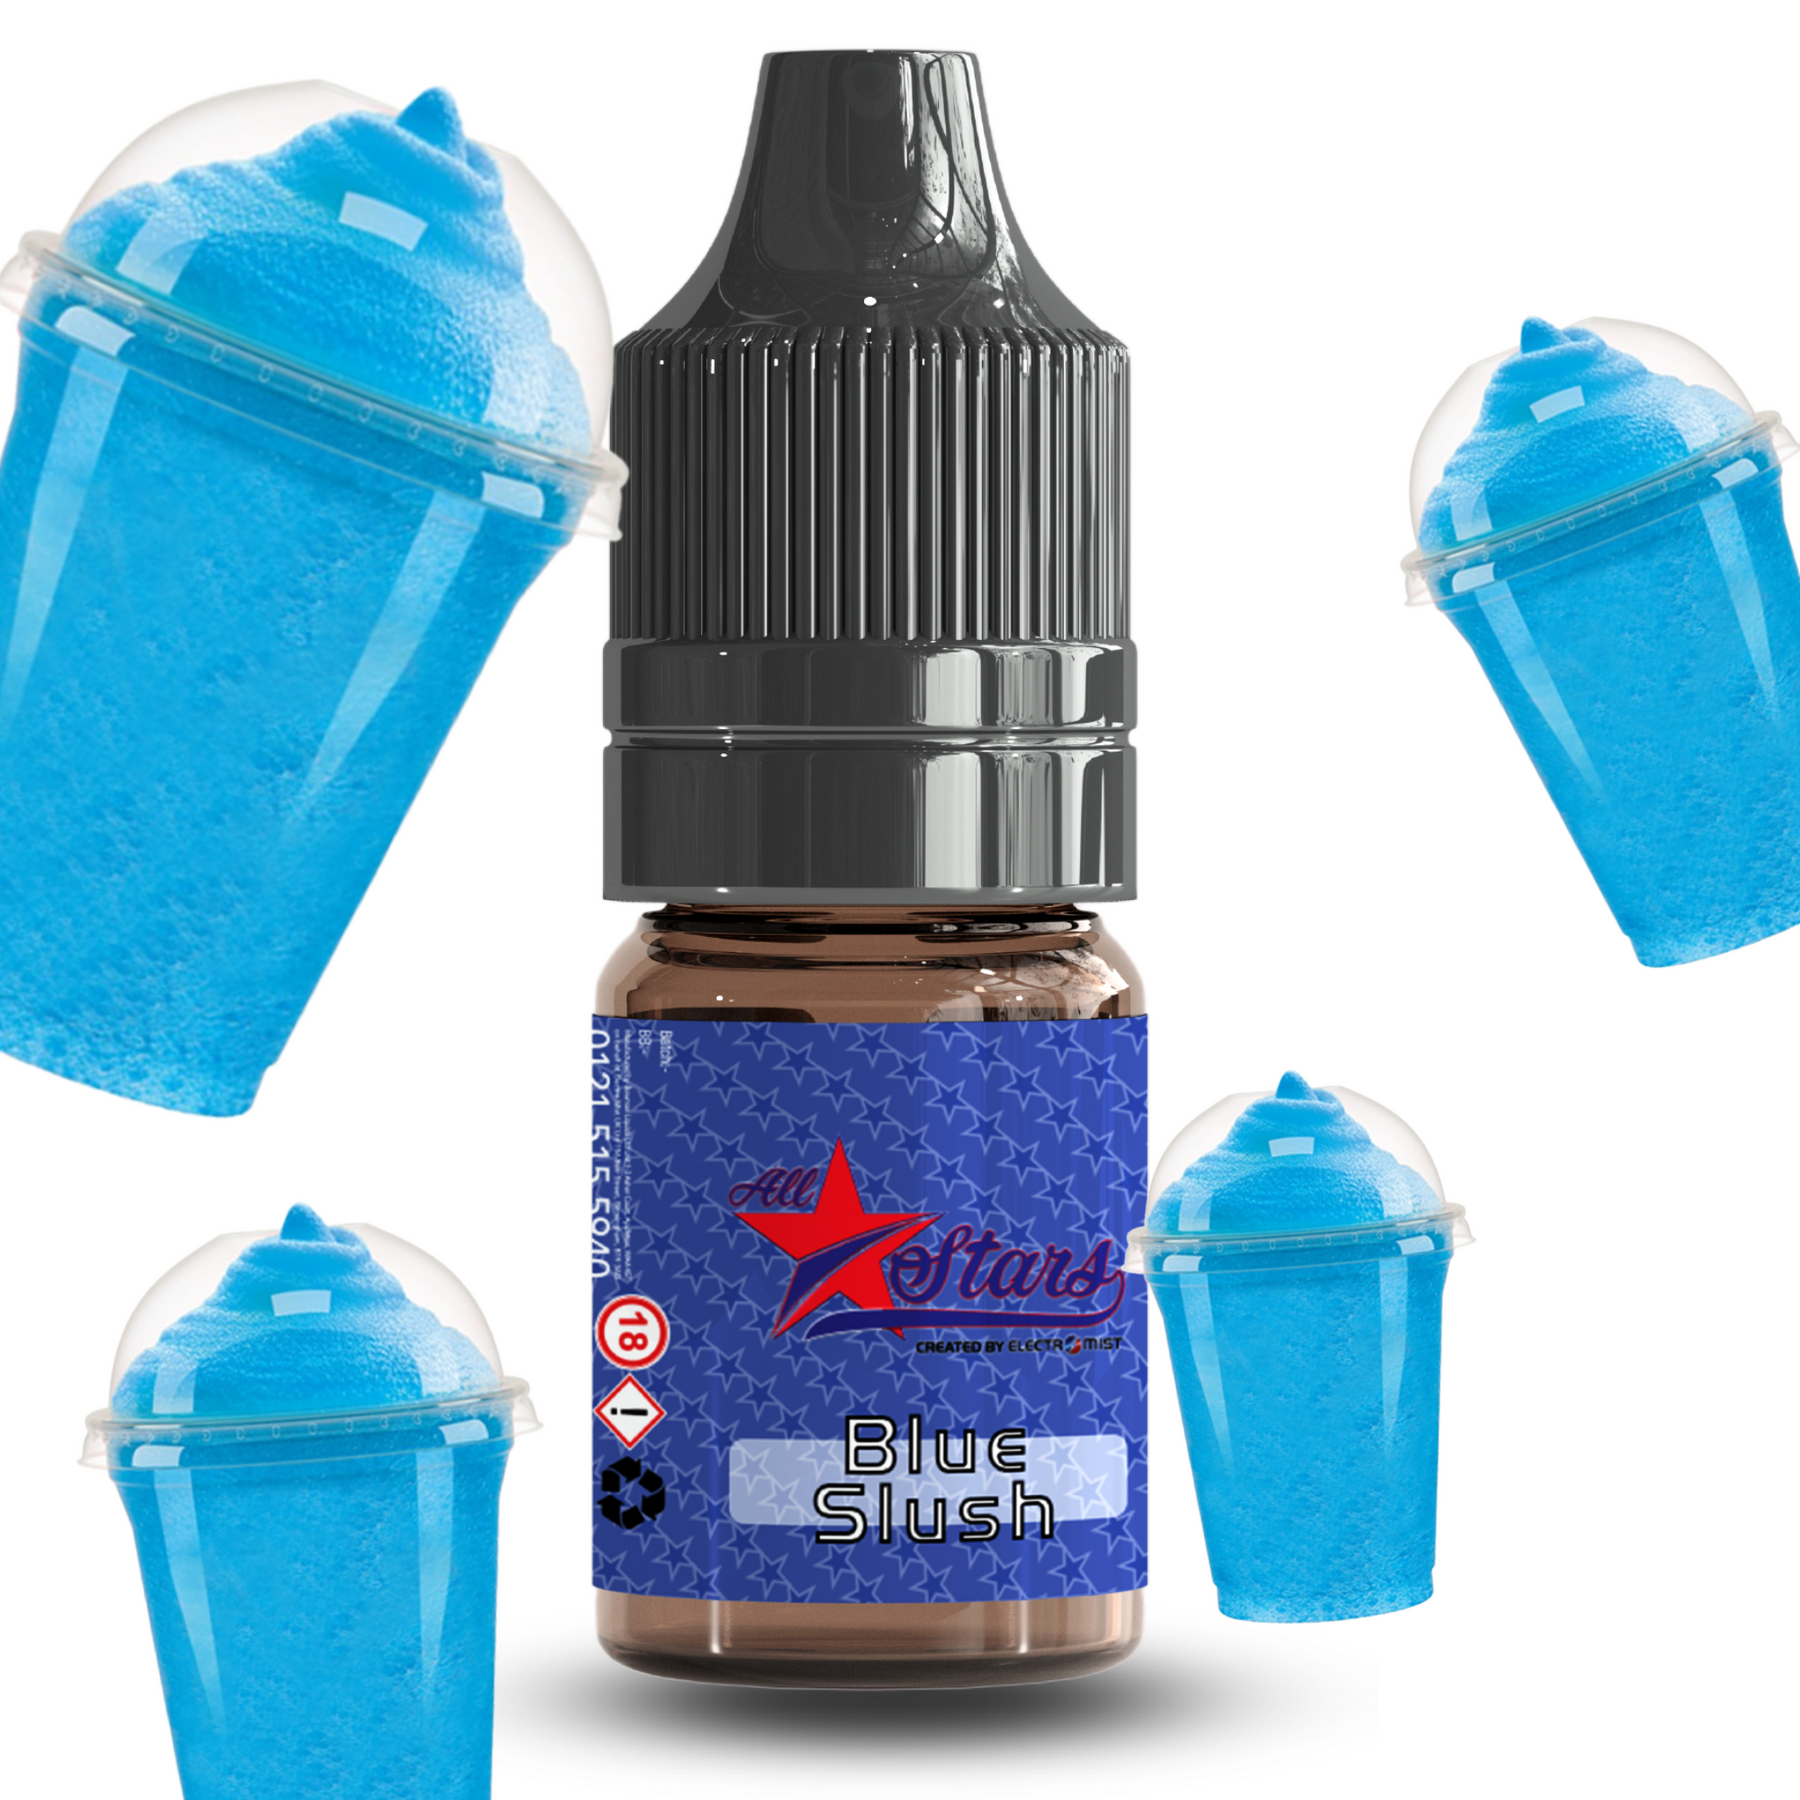 All Stars E-Liquid from the vape brand you can trust, Electromist, . Get your taste buds ready for a flavour sensation, Blue Slush Nicotine Content: 6mg/12mg/18mg Products may contain nicotine. For over 18s Only ejuice, vape pen, eliquid, e cigarette, 10ml, vaping, cloud, PG, VG, 60/40, vape liquid, Flavour